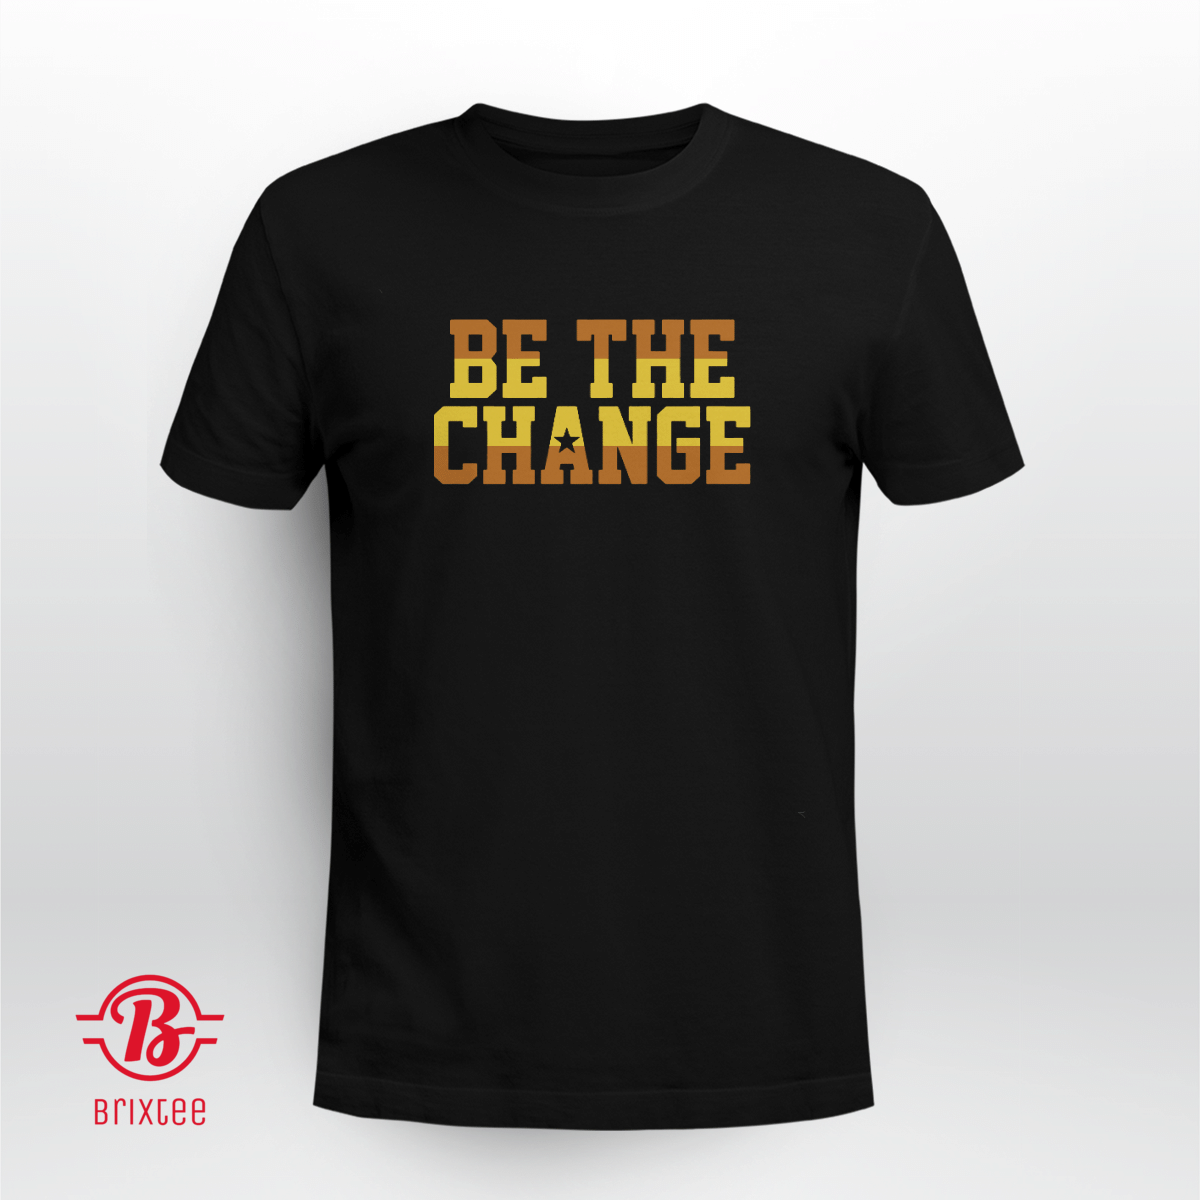 The +1 Effect: Be The Change Houston Astros